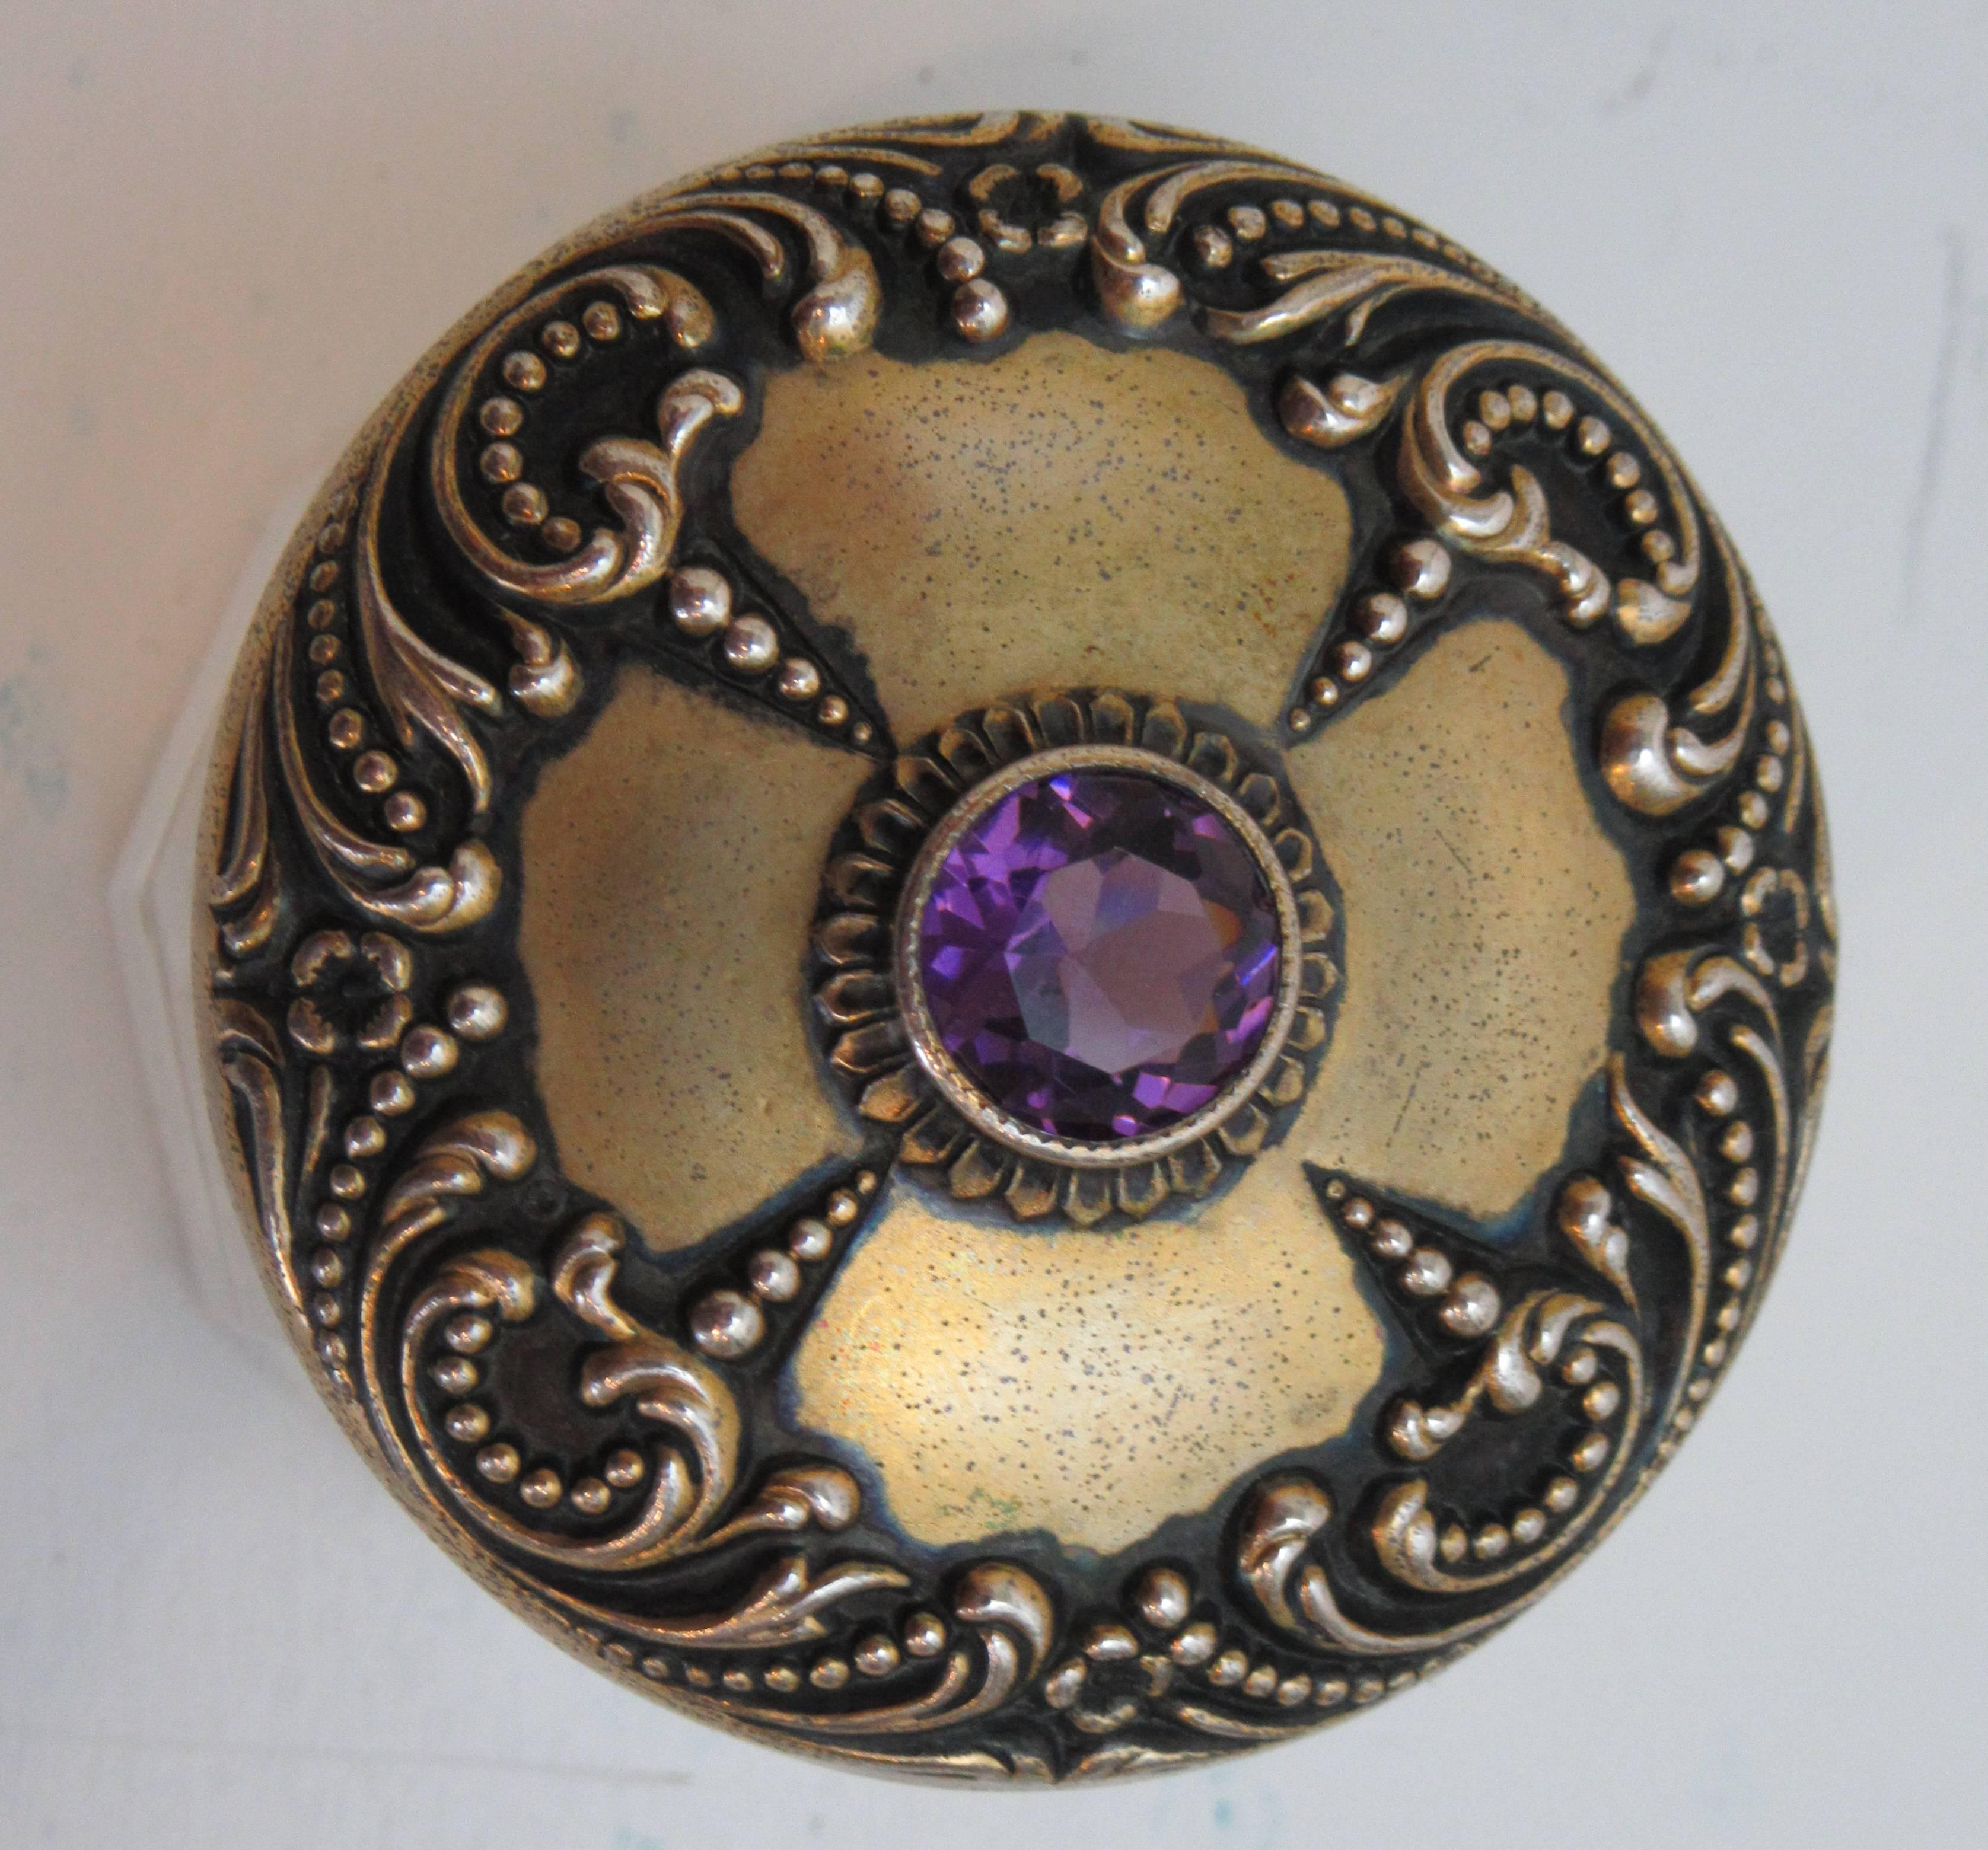 A petite glass jar with a sterling Art Nouveau pattern lid. The center of the lid is fitted with a faceted glass 